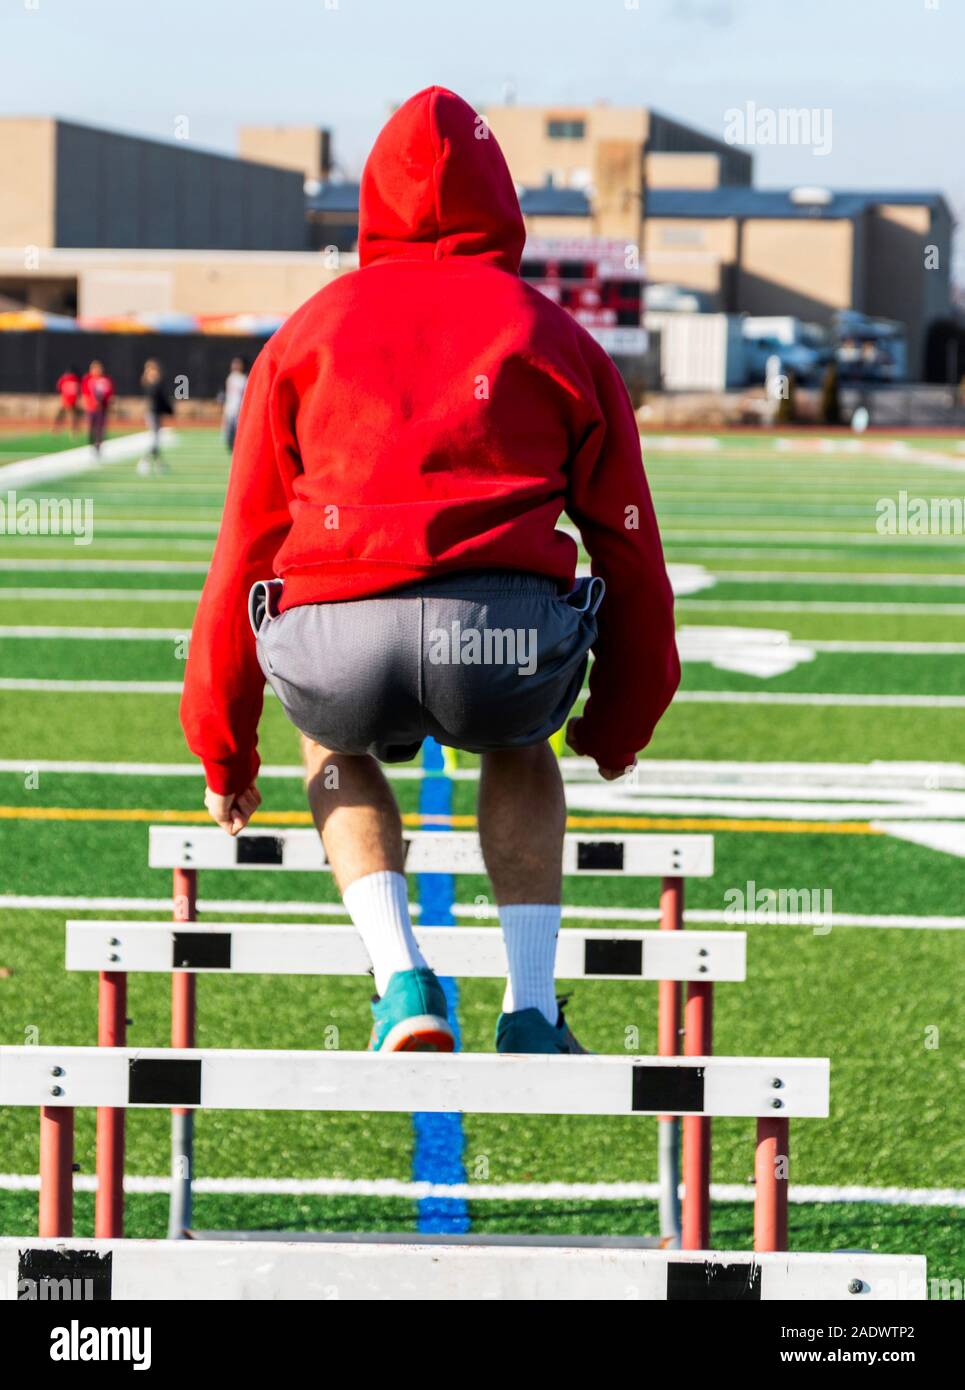 An athlete wearing a red hooded sweatshirt is jumping over hurdles on a green turf field with the view from behind him. Stock Photo